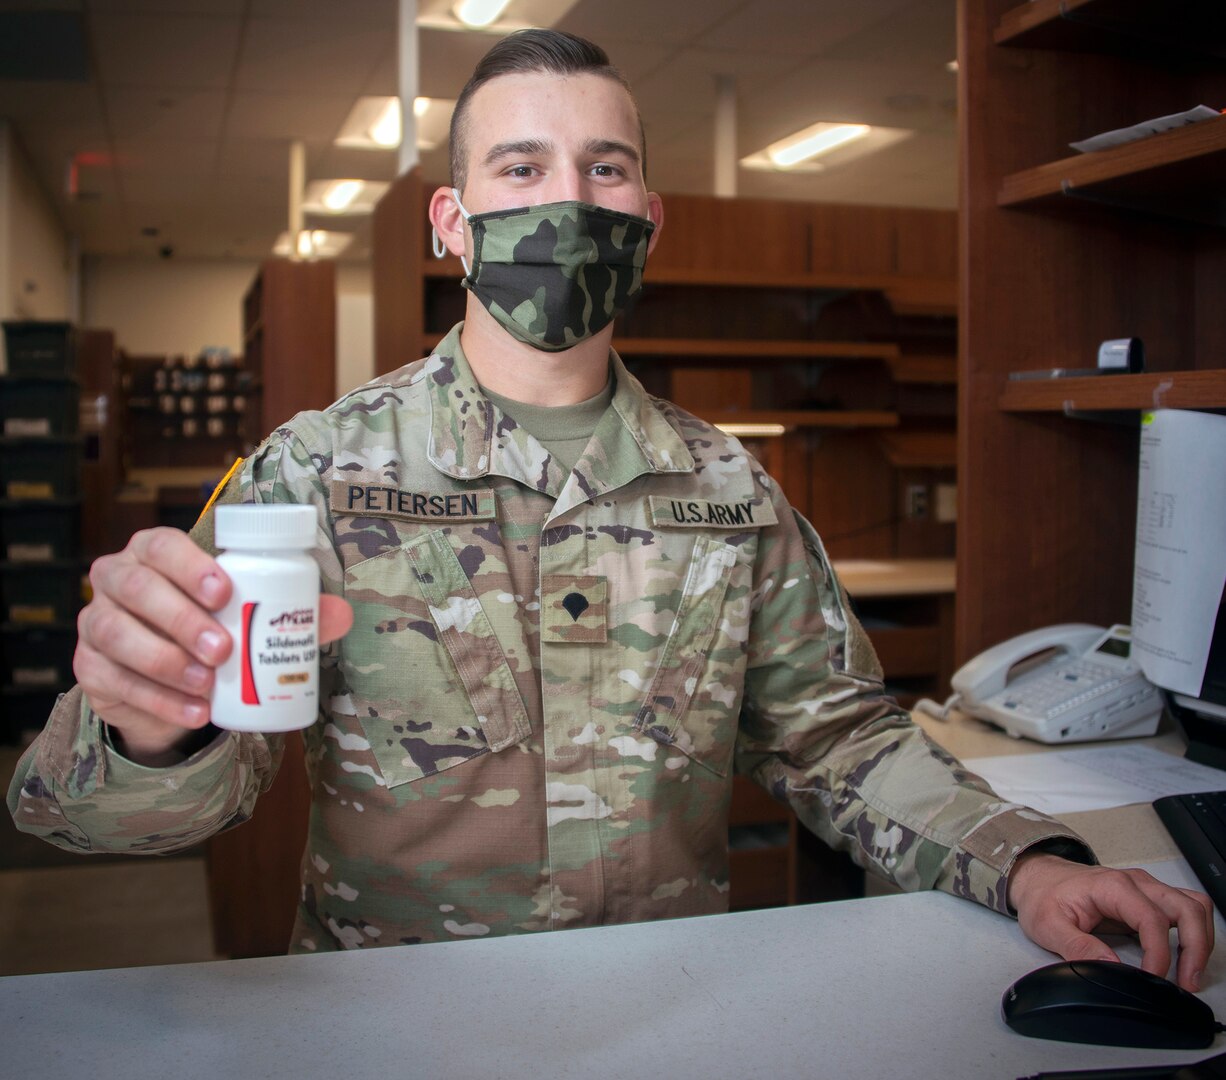 Army Spc. John Petersen, pharmacy technician, hands a prescription to a beneficiary at the Community Pharmacy in the Exchange at Joint Base San Antonio-Fort Sam Houston, Feb. 1. On average, new prescriptions take about 30 minutes to fill. For prescription refills customers generally wait about 2 minutes for pick up.